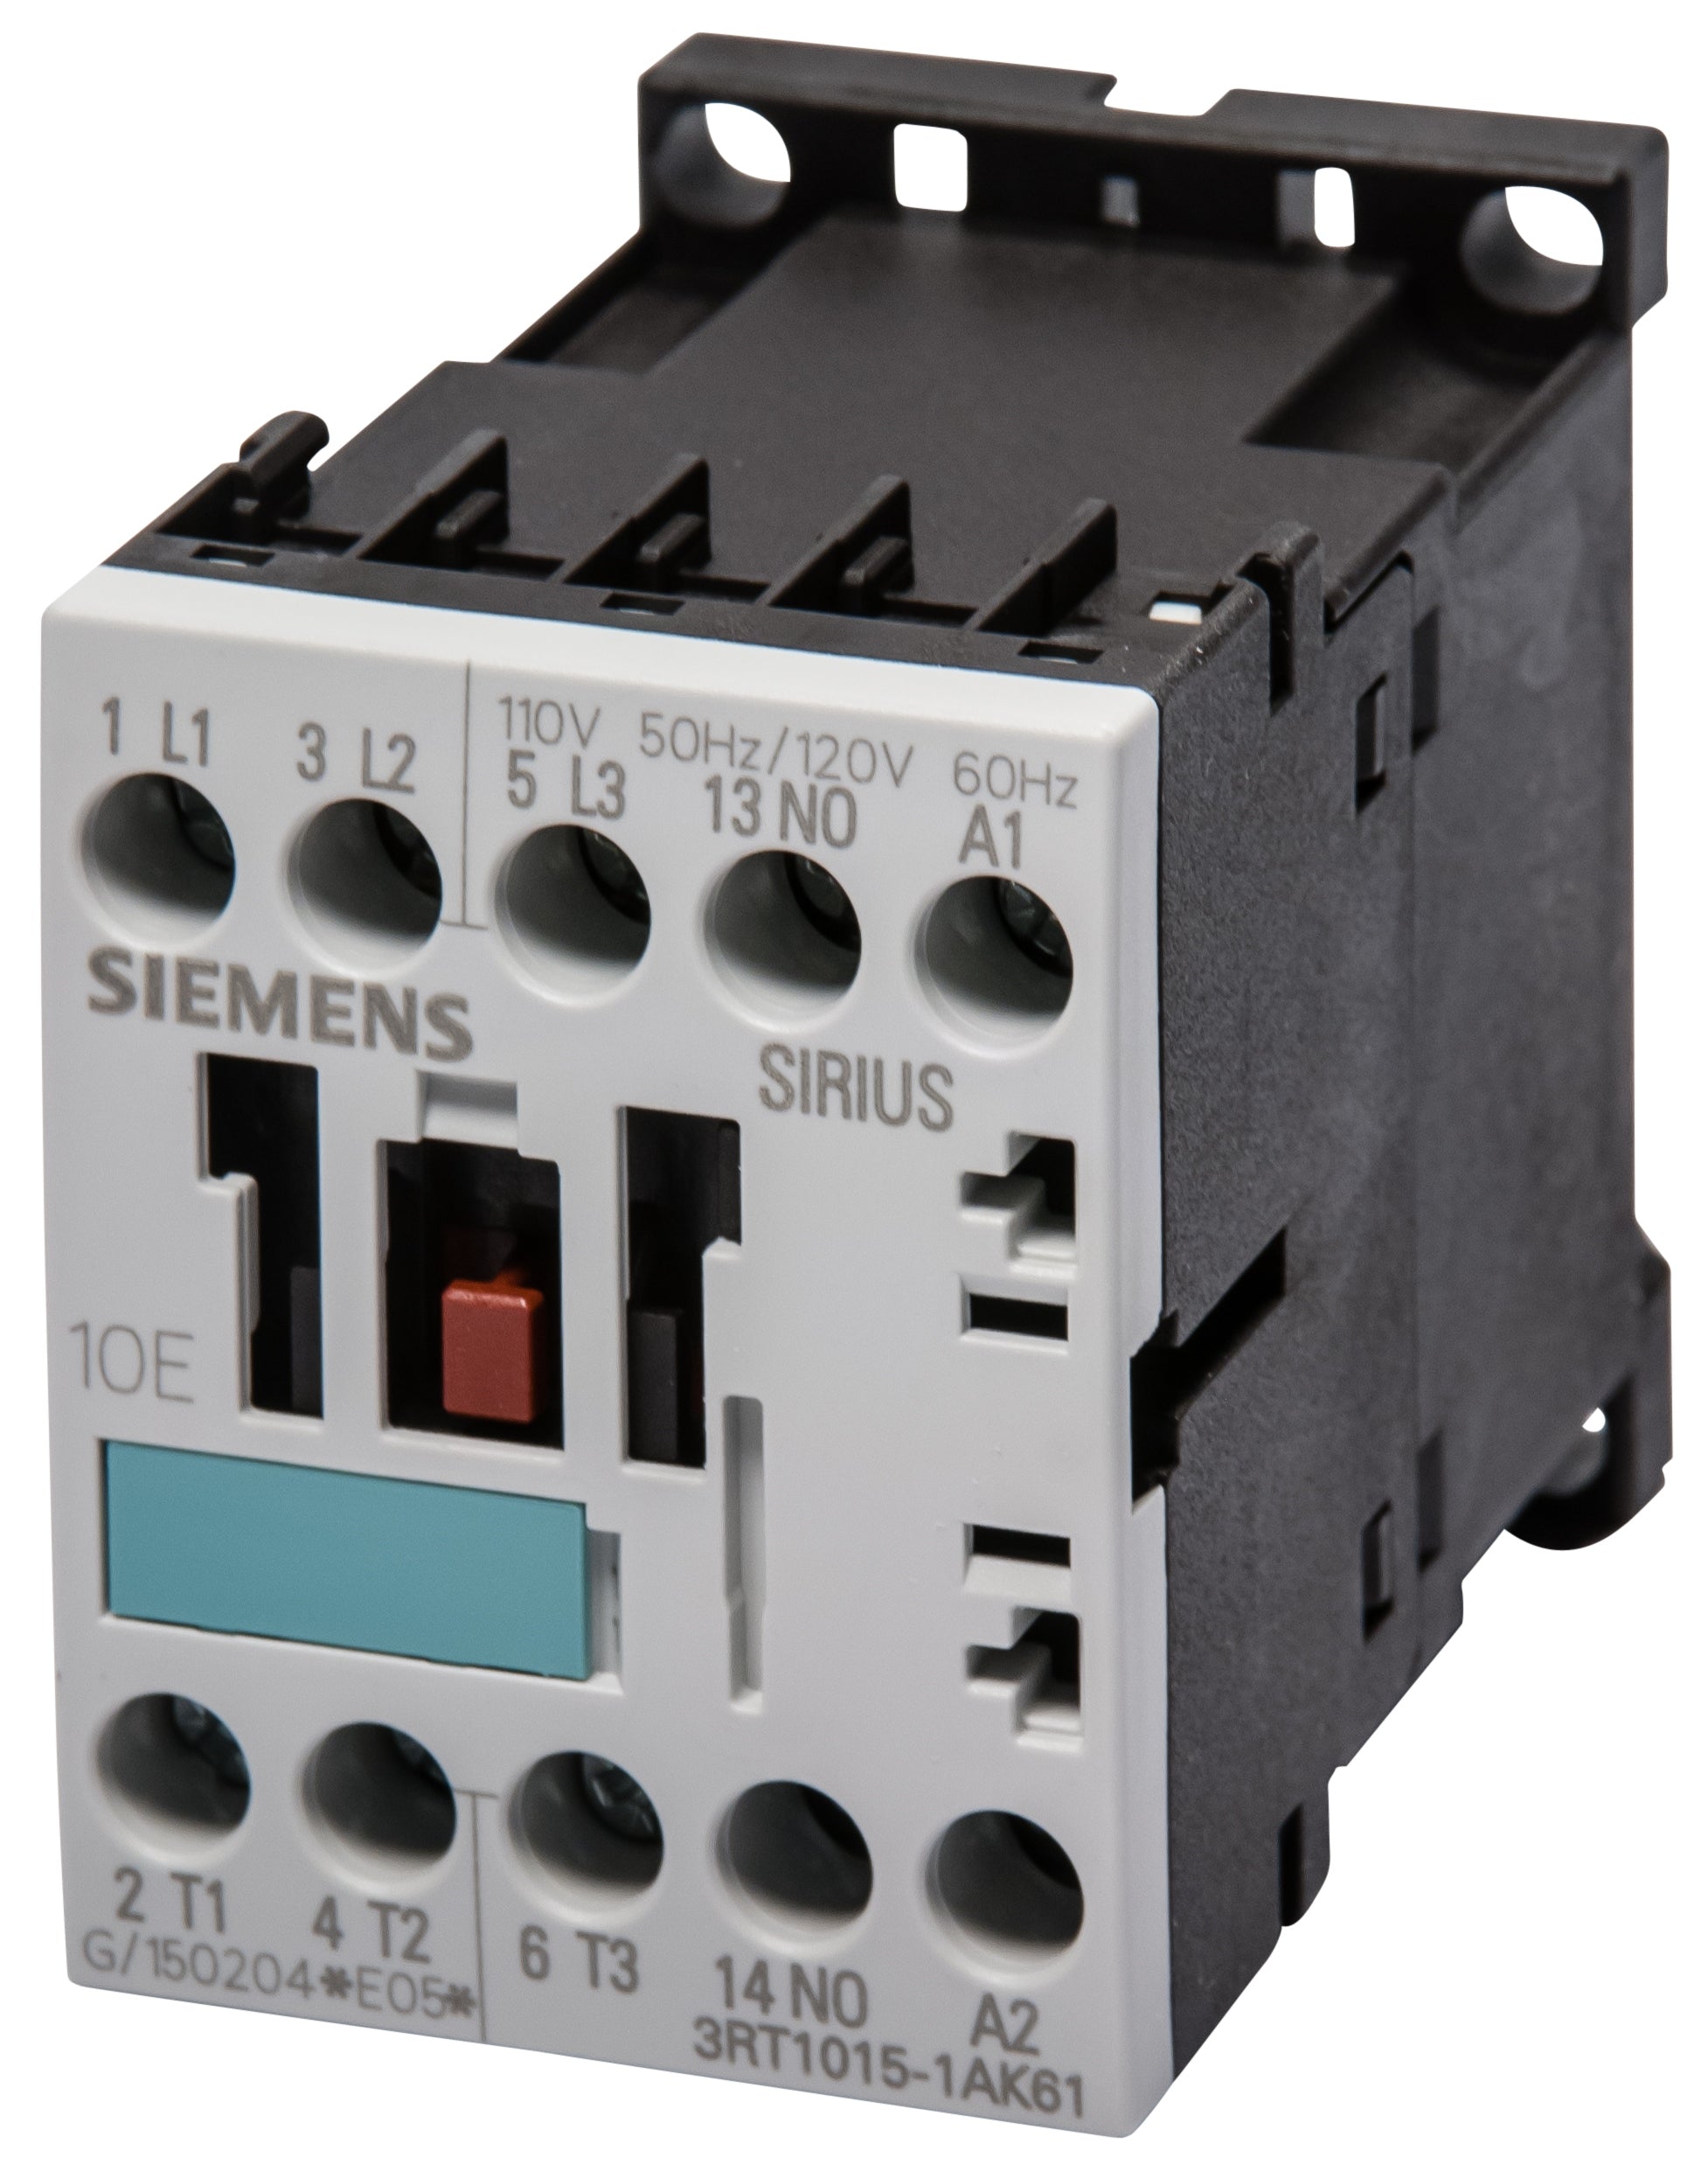 FOR SIZE S10/S12 SIEMENS FRAME TERMINAL BLOCK 3RT1966-4G FOR CONTACTORS 